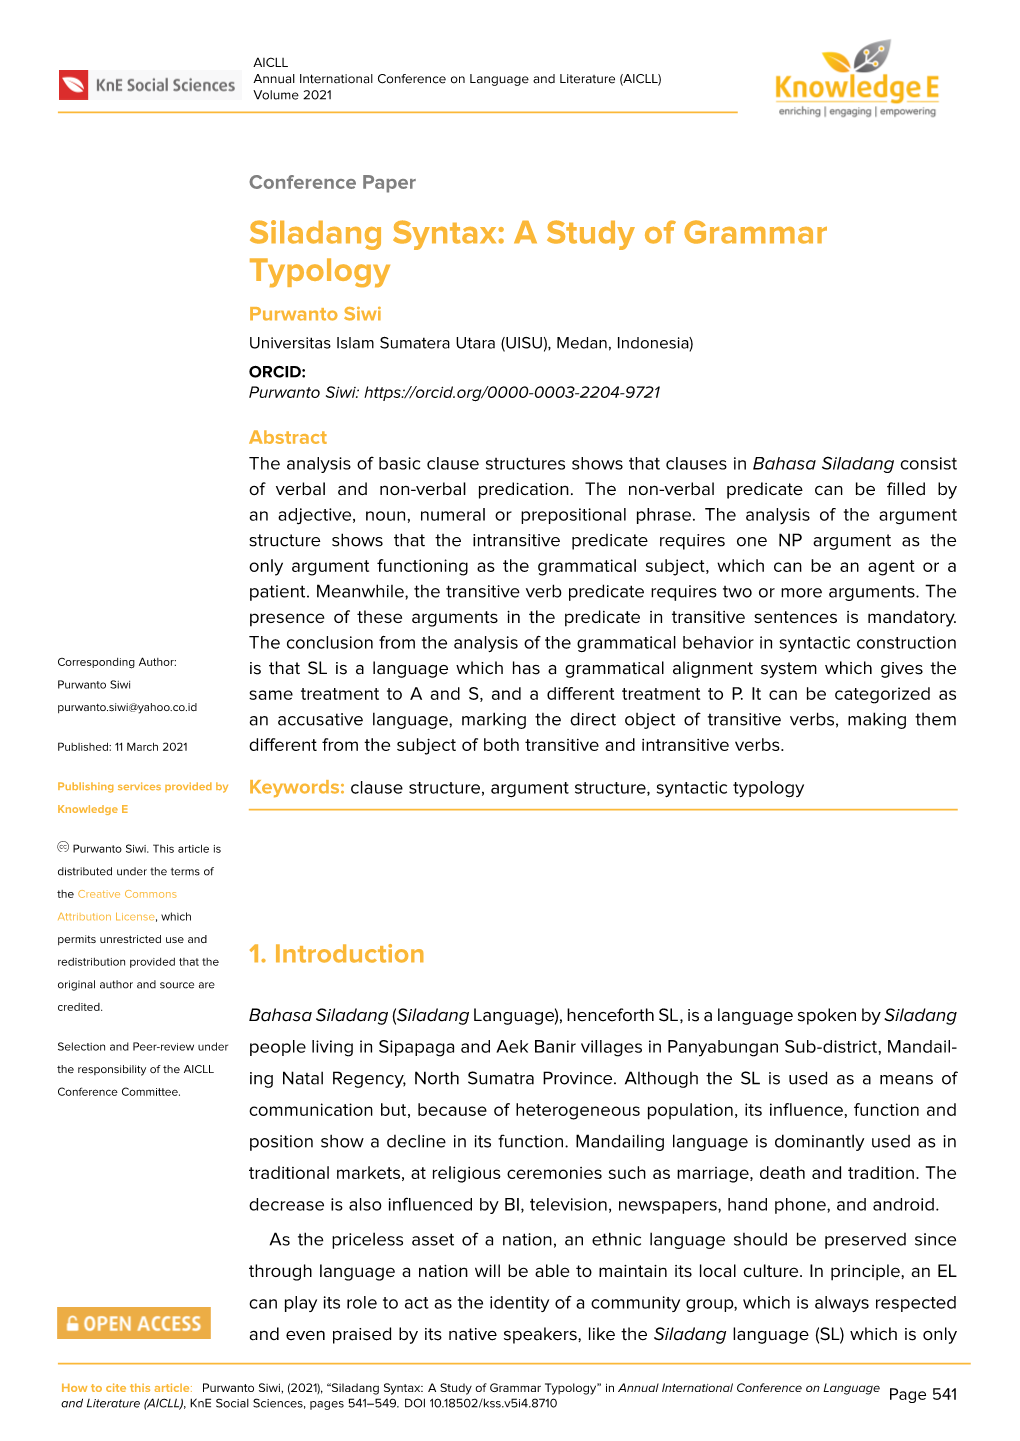 Siladang Syntax: a Study of Grammar Typology